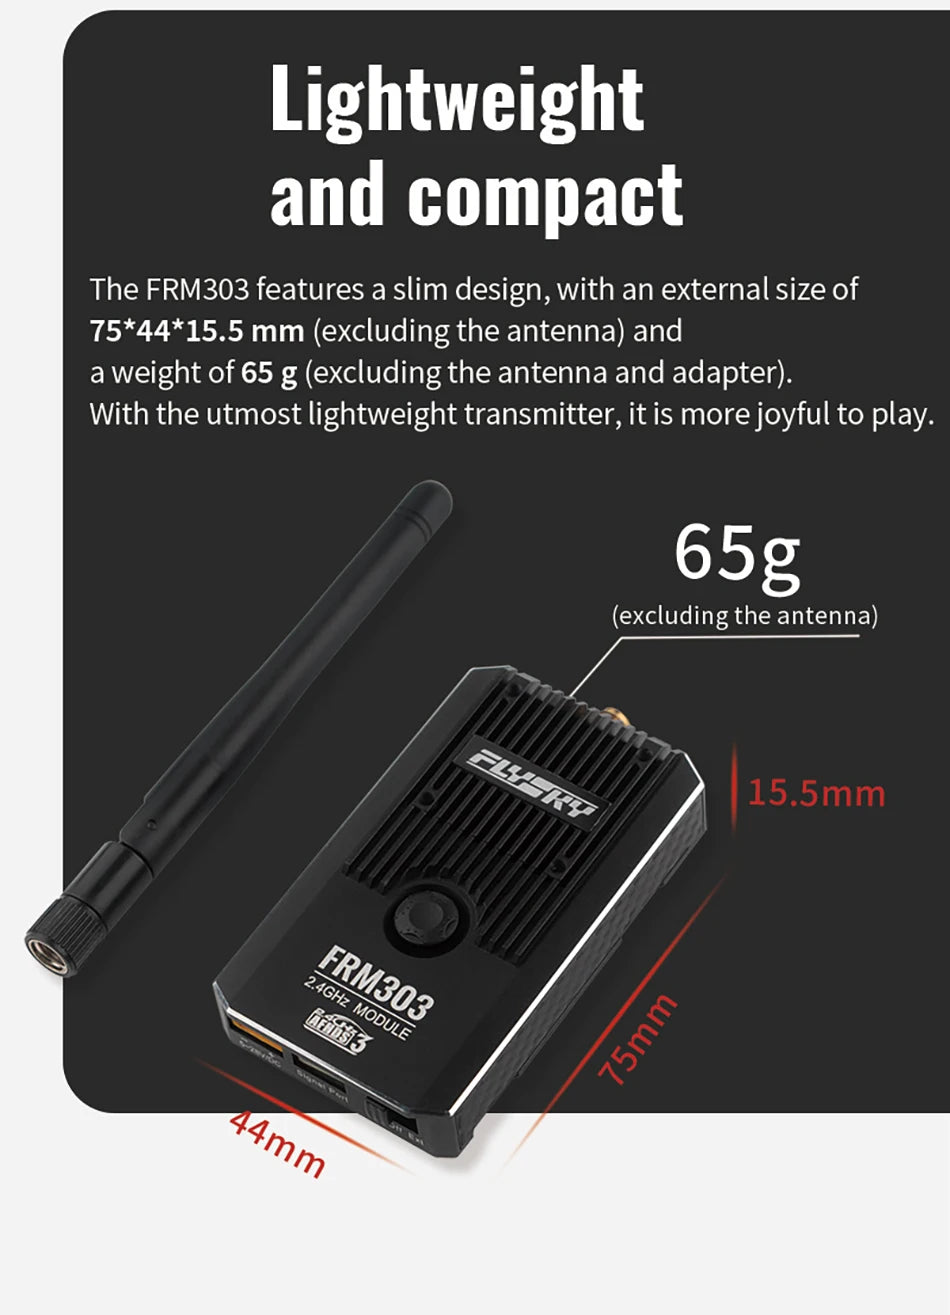 FLYSKY FRM303 2.4GHz TX Module, the FRM3O3 features a slim design, with an external size of 75*